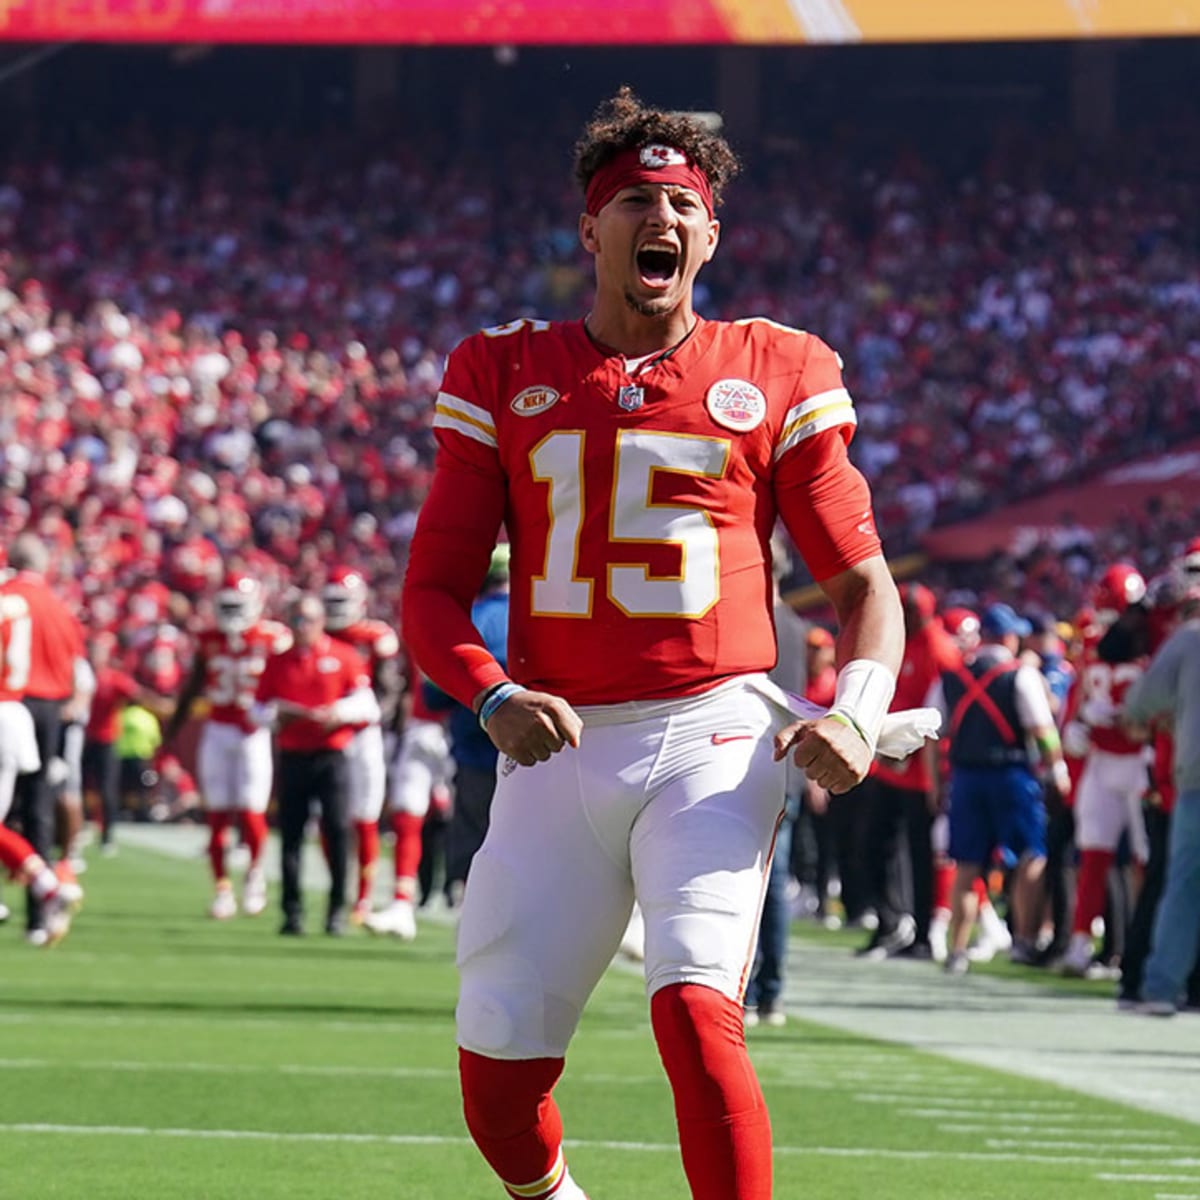 NFL: Patrick Mahomes agrees to terms on restructured Chiefs contract